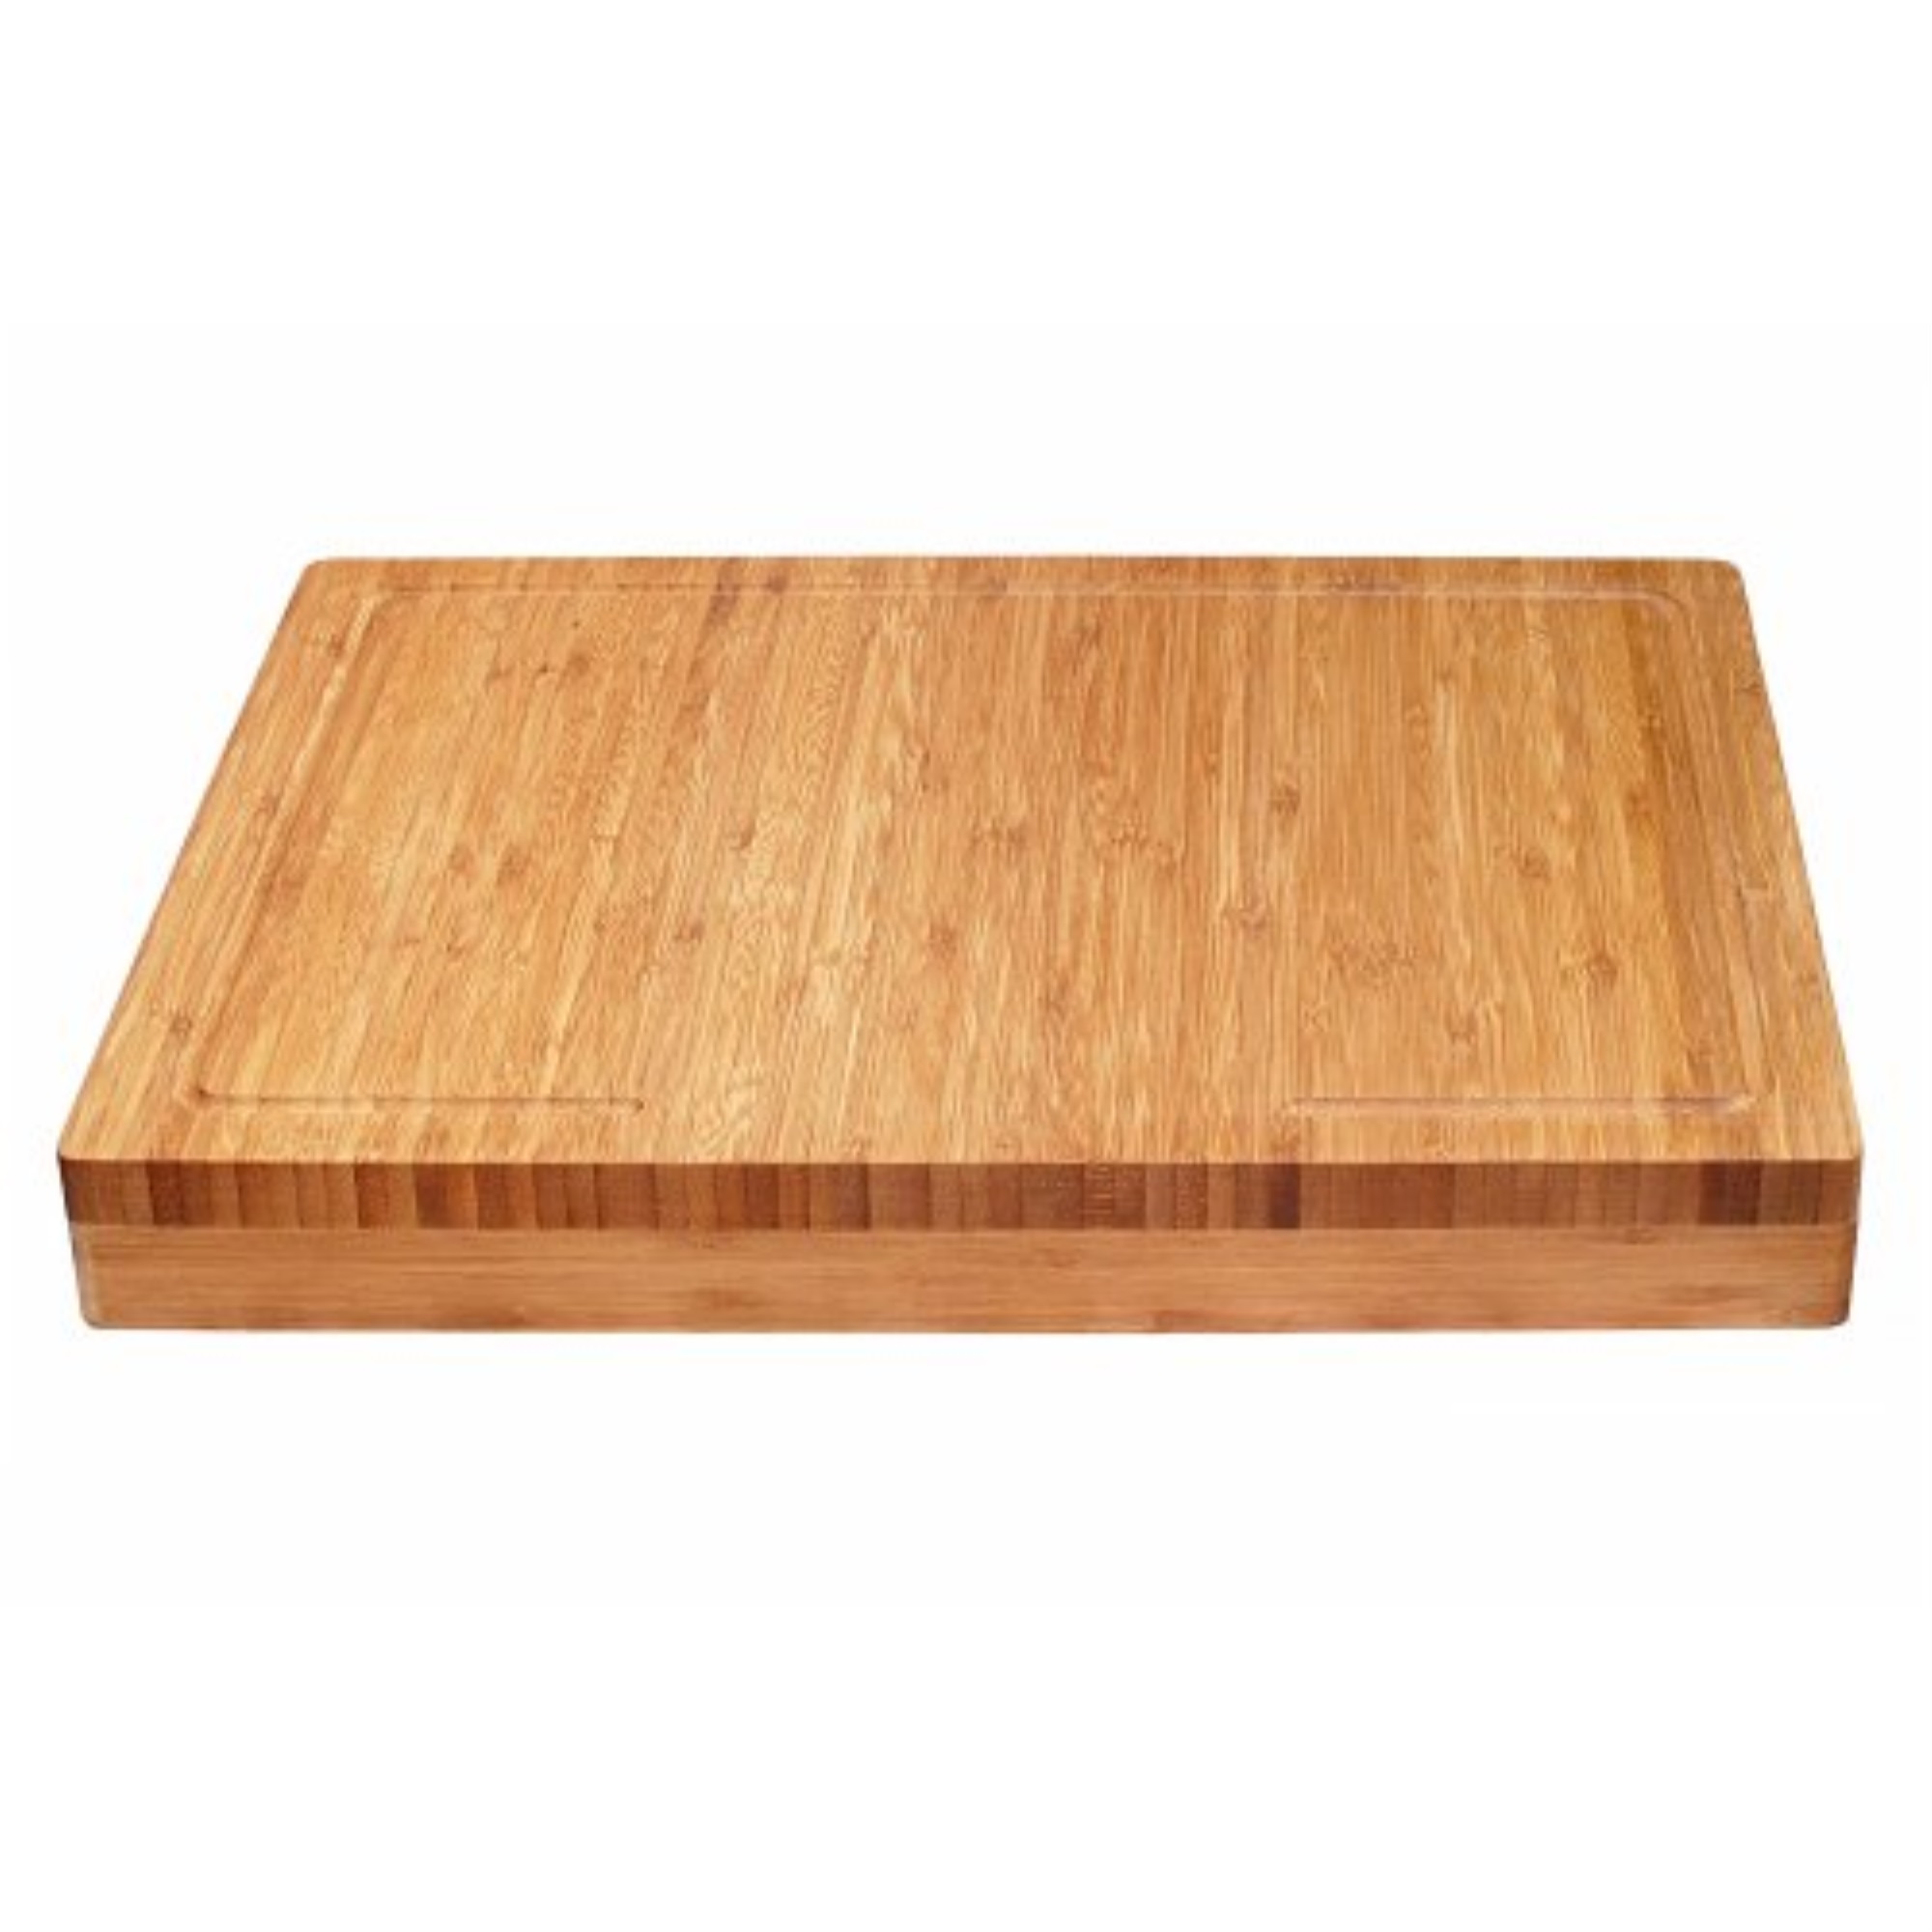 Lipper International Bamboo Wood Over-the-Counter-Edge Kitchen Cutting and Serving Board, 17-5/8" x 13-7/8" x 2"